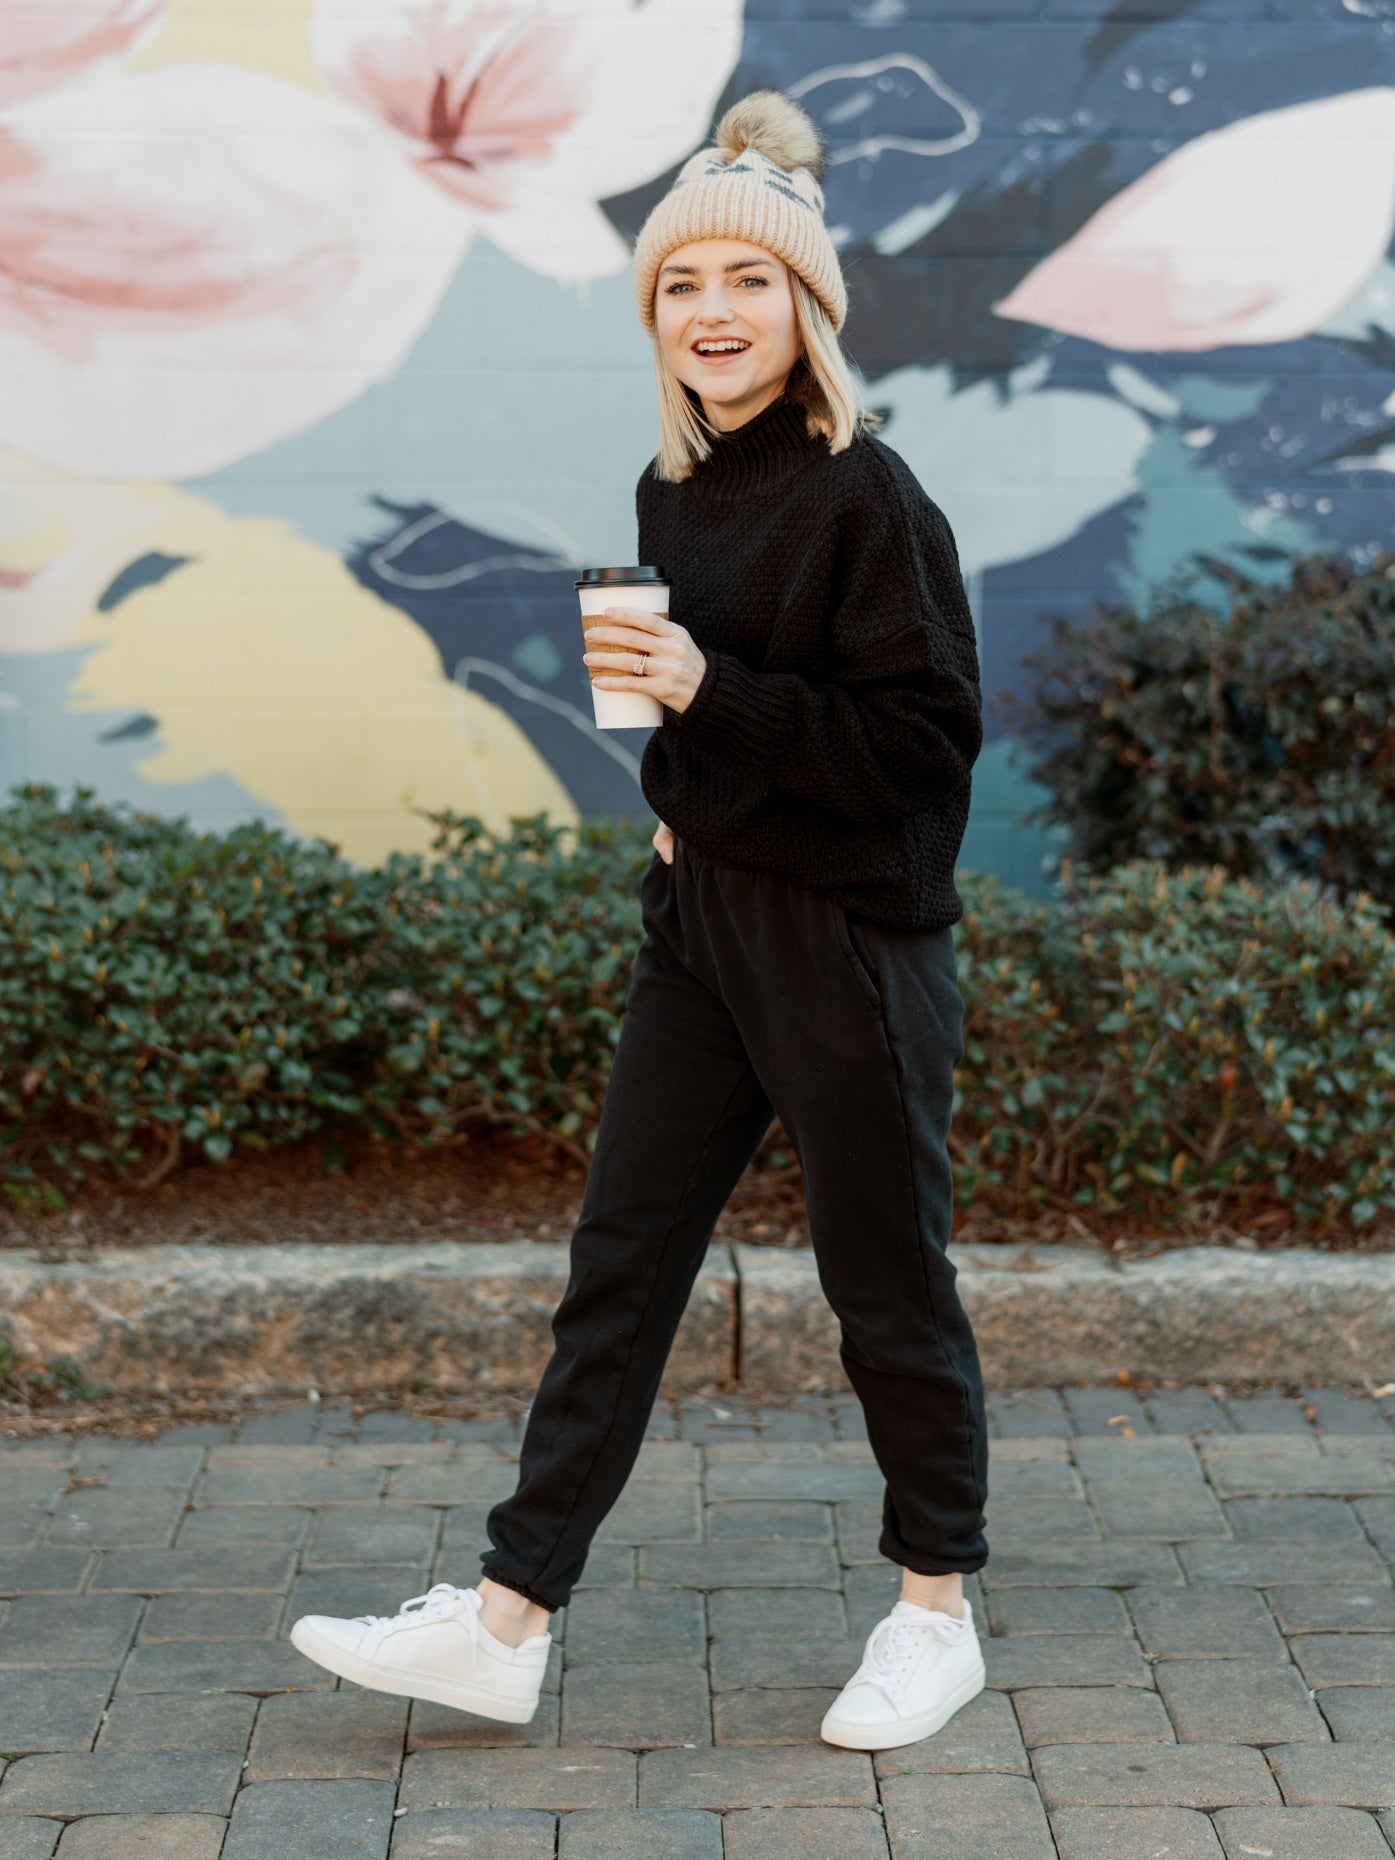 What To Wear With Black Sweatpants Girl? – solowomen